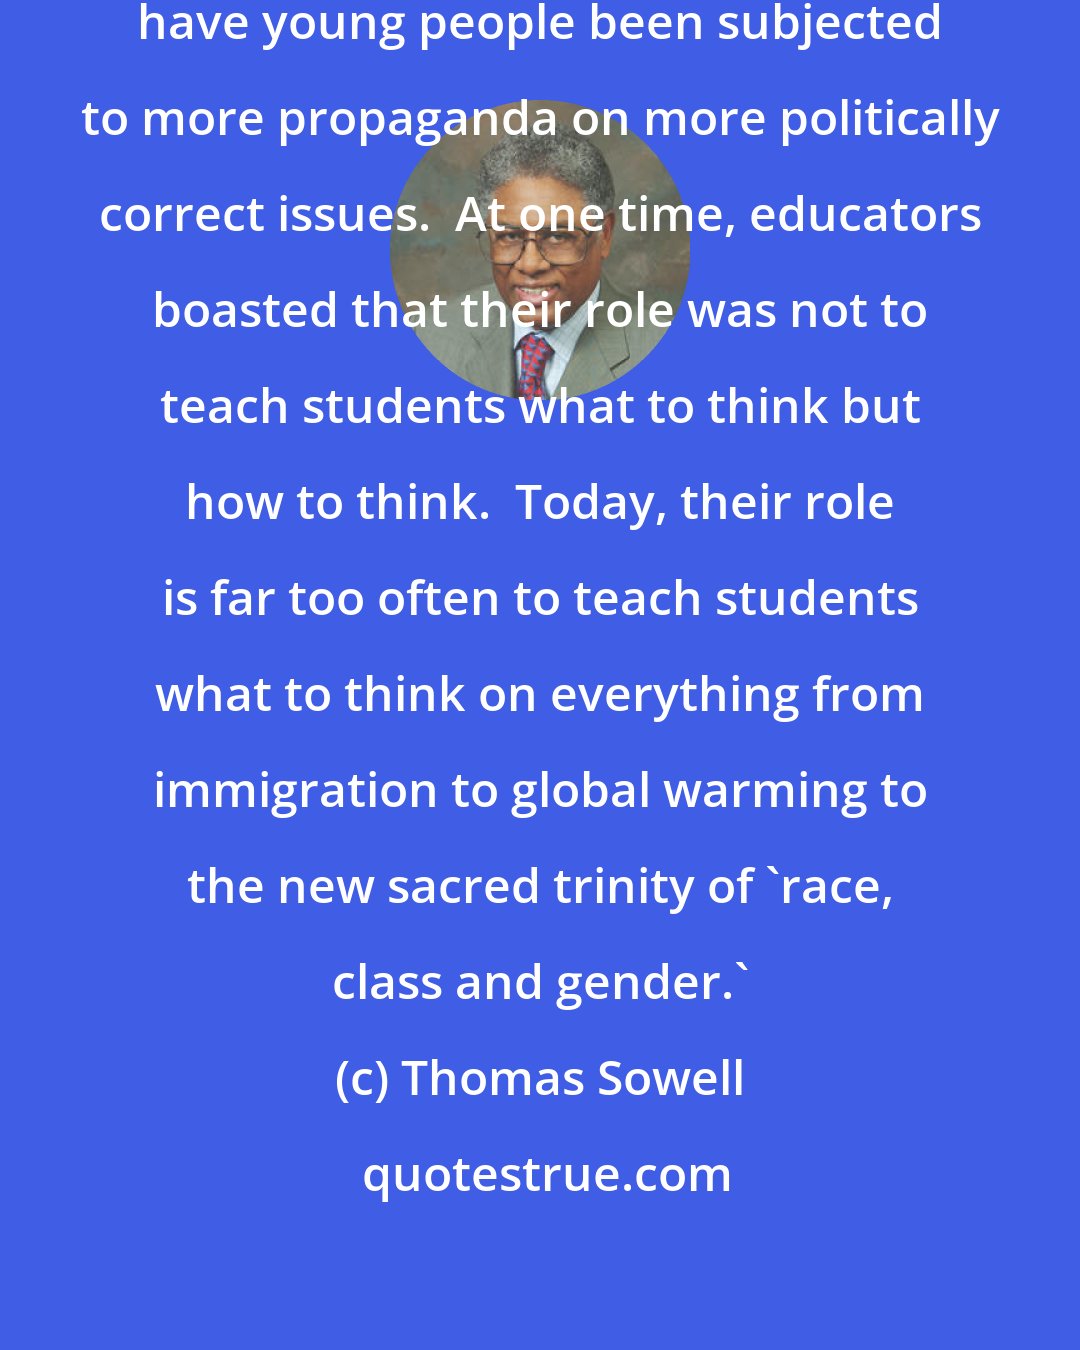 Thomas Sowell: Not since the days of the Hitler Youth have young people been subjected to more propaganda on more politically correct issues.  At one time, educators boasted that their role was not to teach students what to think but how to think.  Today, their role is far too often to teach students what to think on everything from immigration to global warming to the new sacred trinity of 'race, class and gender.'